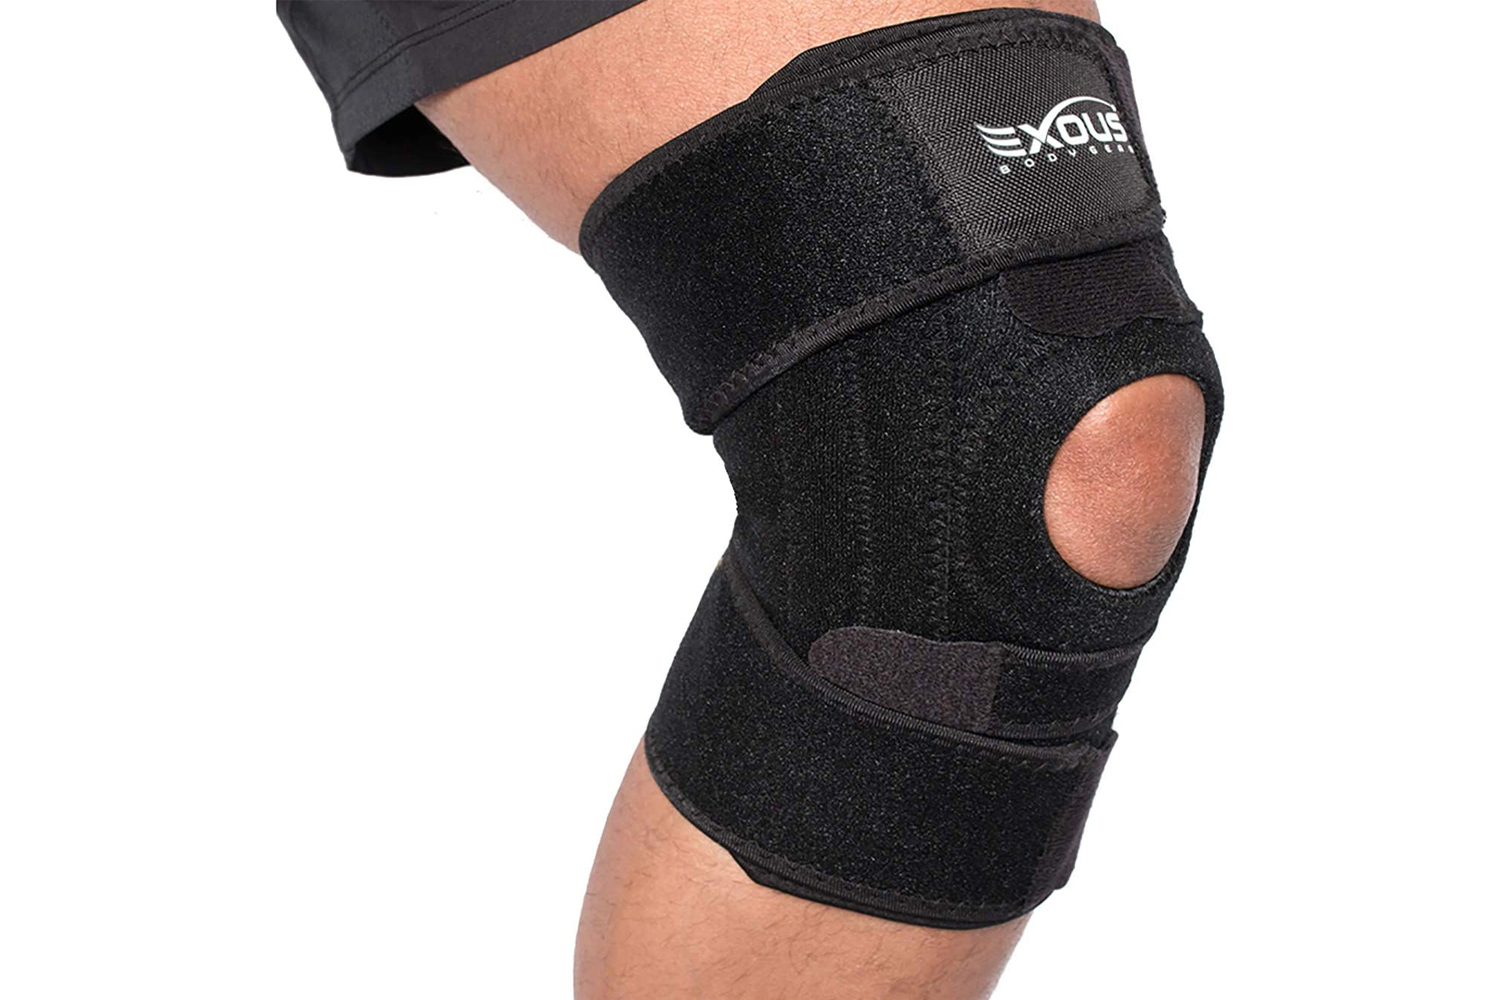 Running Hiking Knee Brace with Side Stabilizers Patella Gel Pads Silicone Non Slip Knee Support Adjustable Breathable Wrap Knee Support for Man Women Knee Pain Meniscus Tear,ACL,MCL,Arthritis 